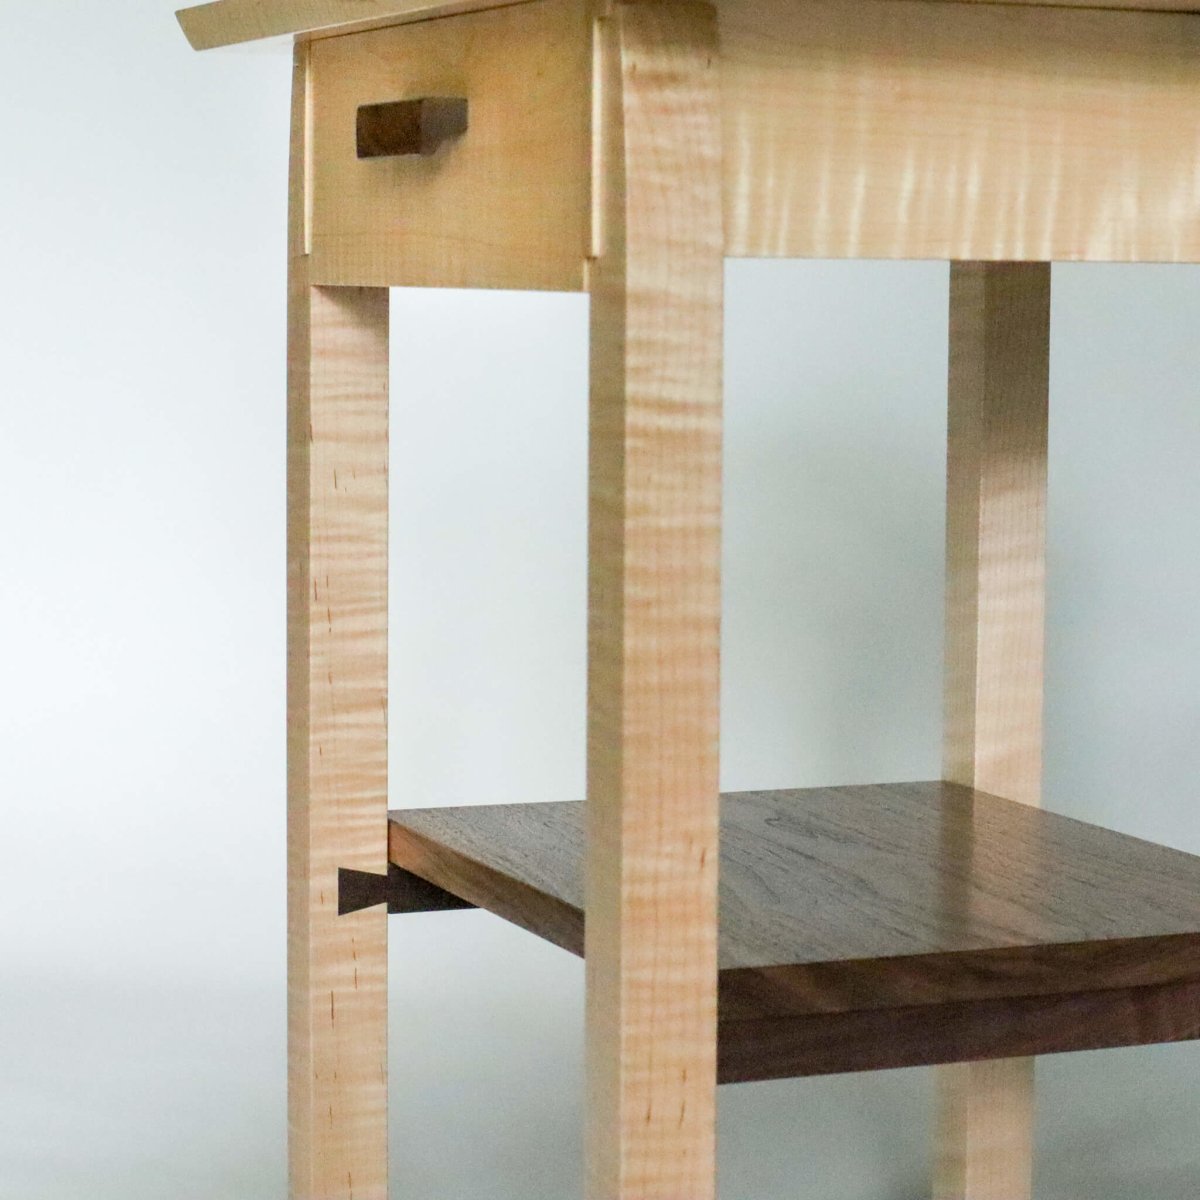 dovetail details on the shelf support of the contemporary wood nightstands by Mokuzai Furniture